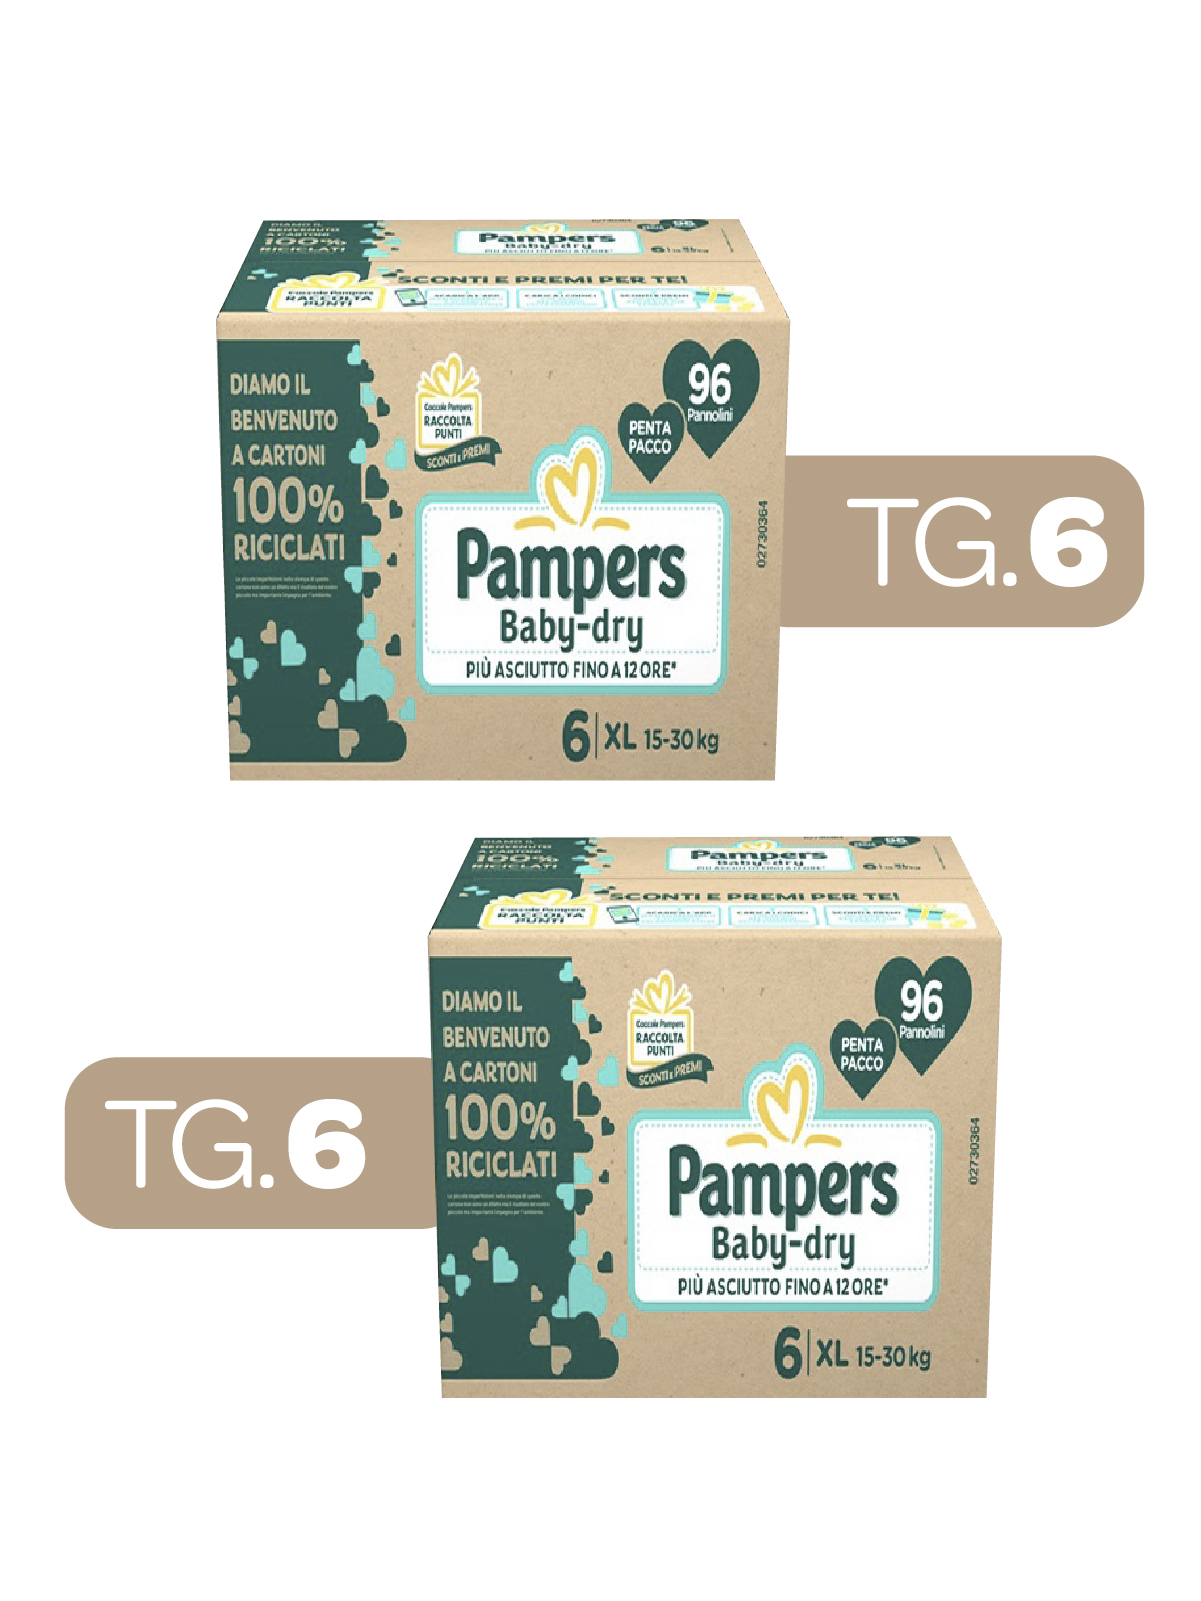 Pampers – 2 pack baby dry tg.6 x96 pz - 